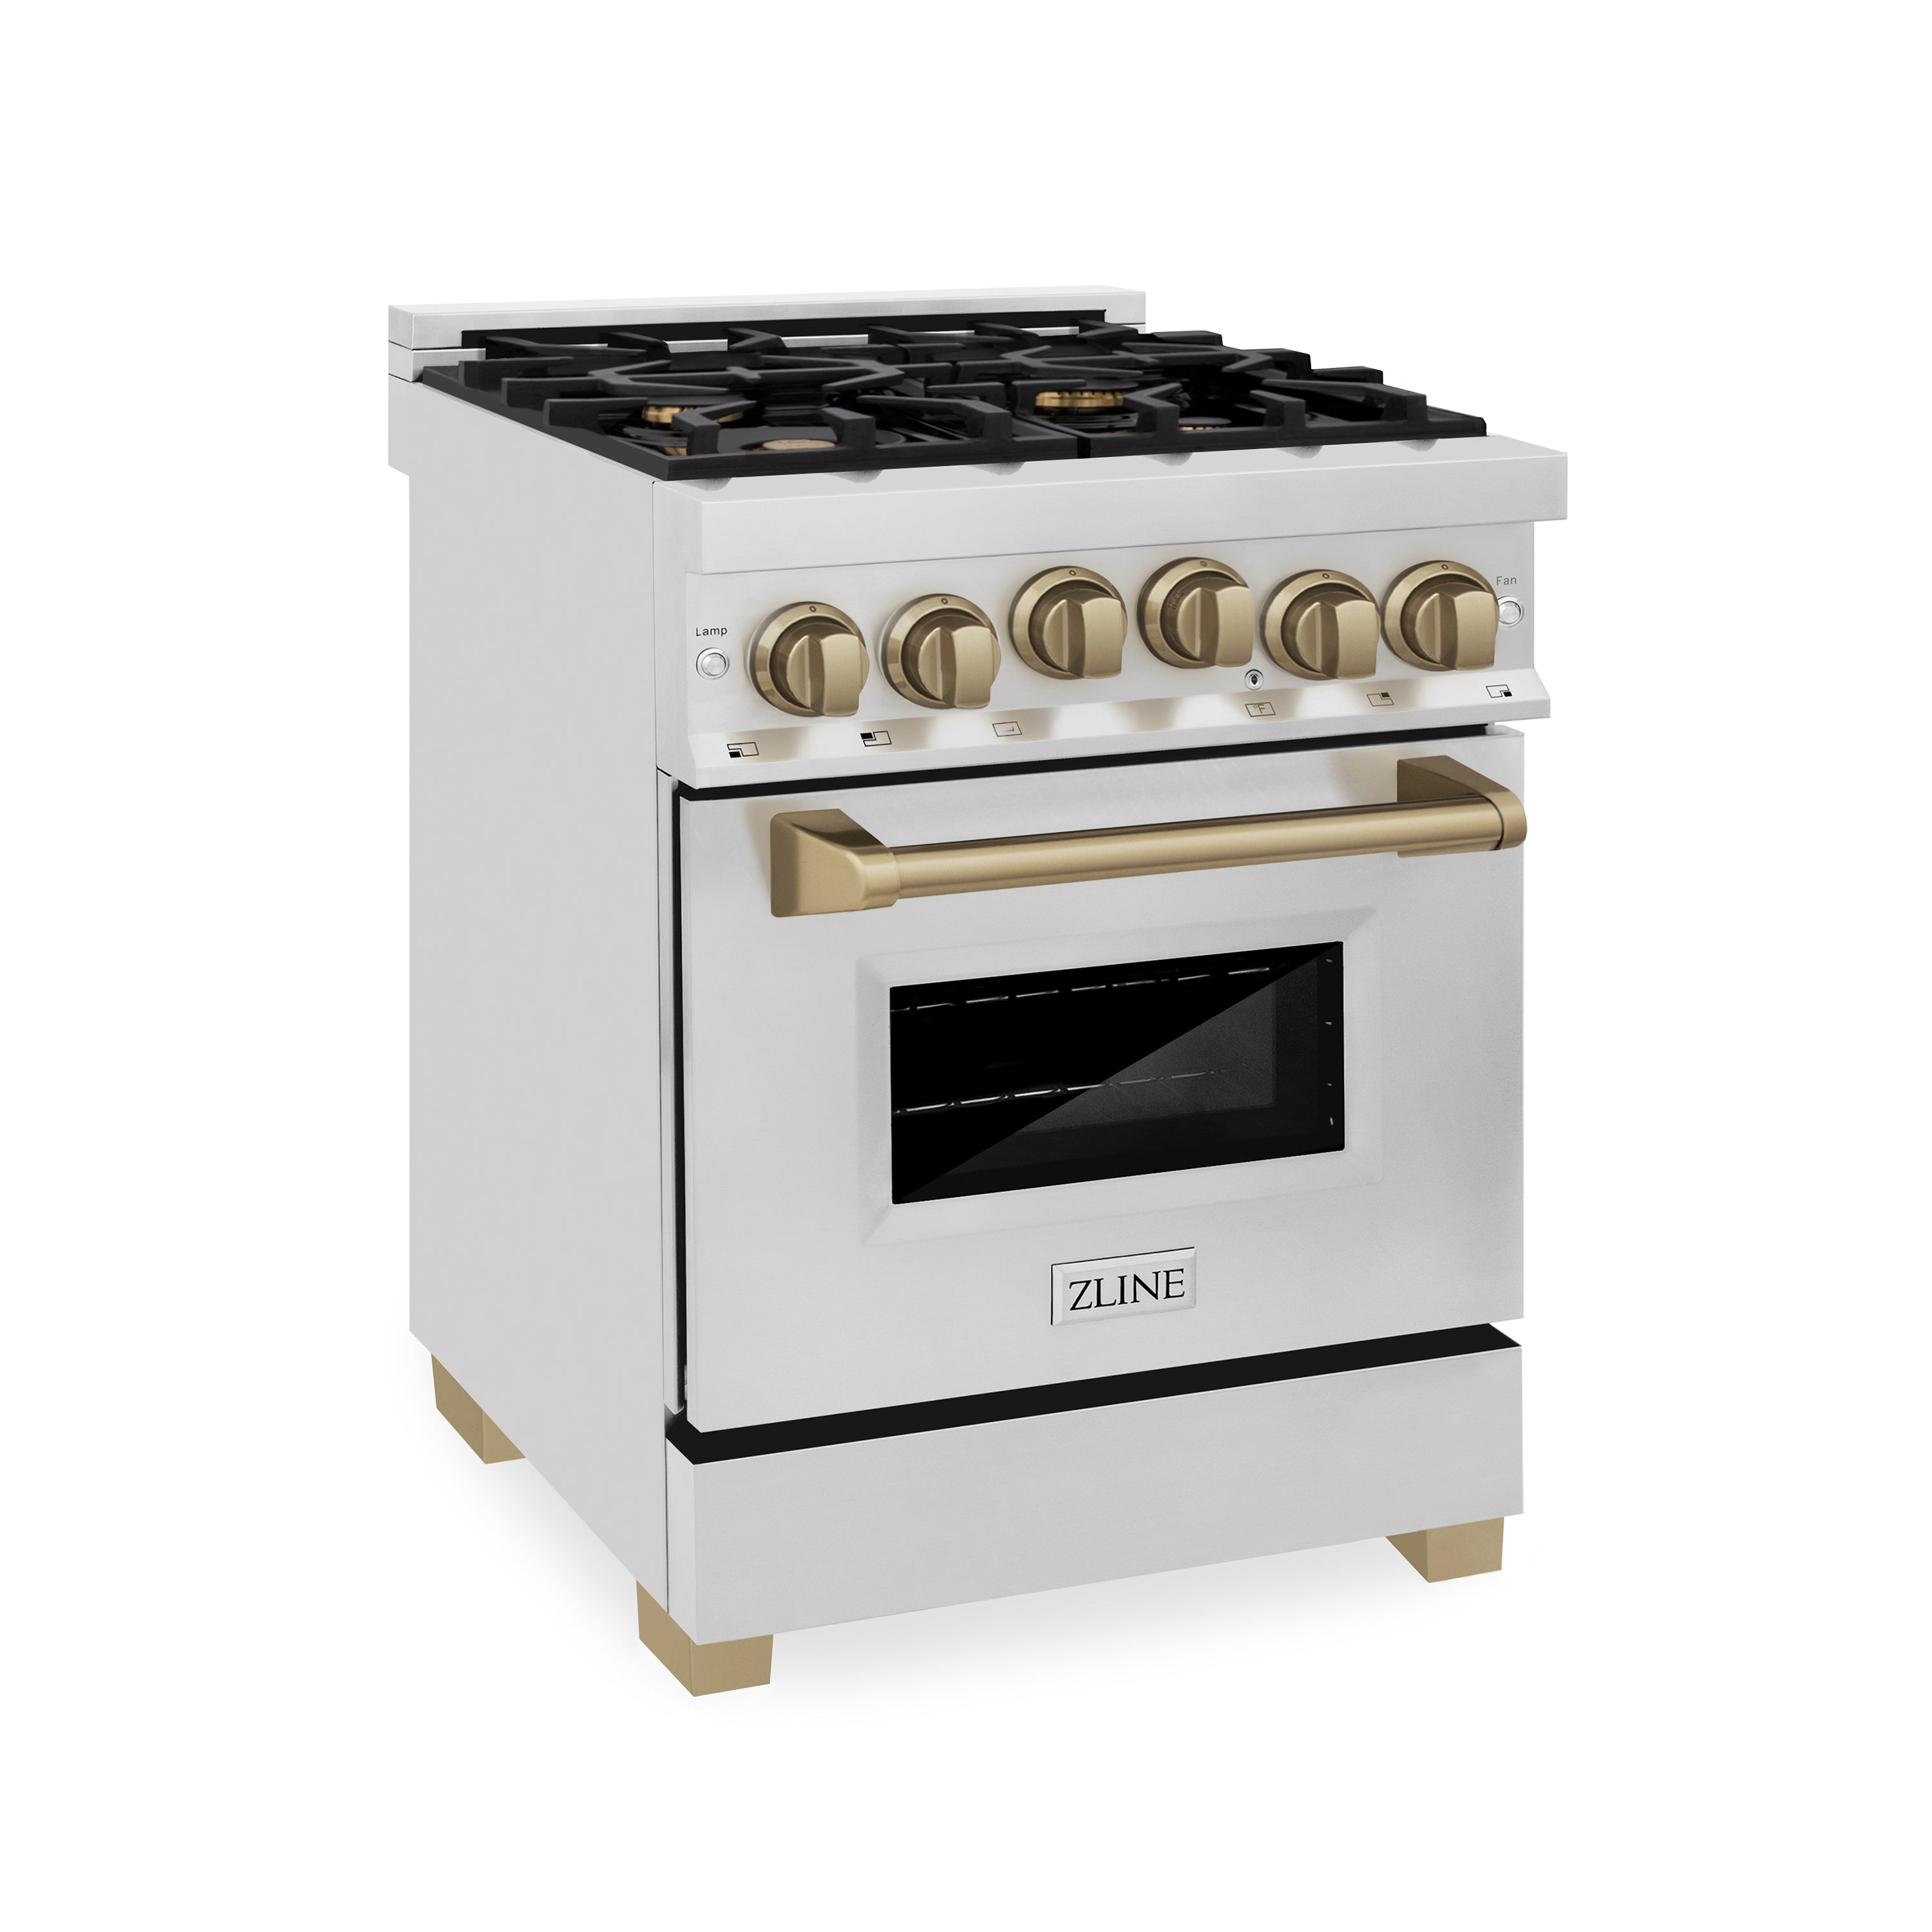 ZLINE Autograph Edition 24" 2.8 cu. ft. Range with Gas Stove and Gas Oven in Stainless Steel with Champagne Bronze Accents (RGZ-24-CB)